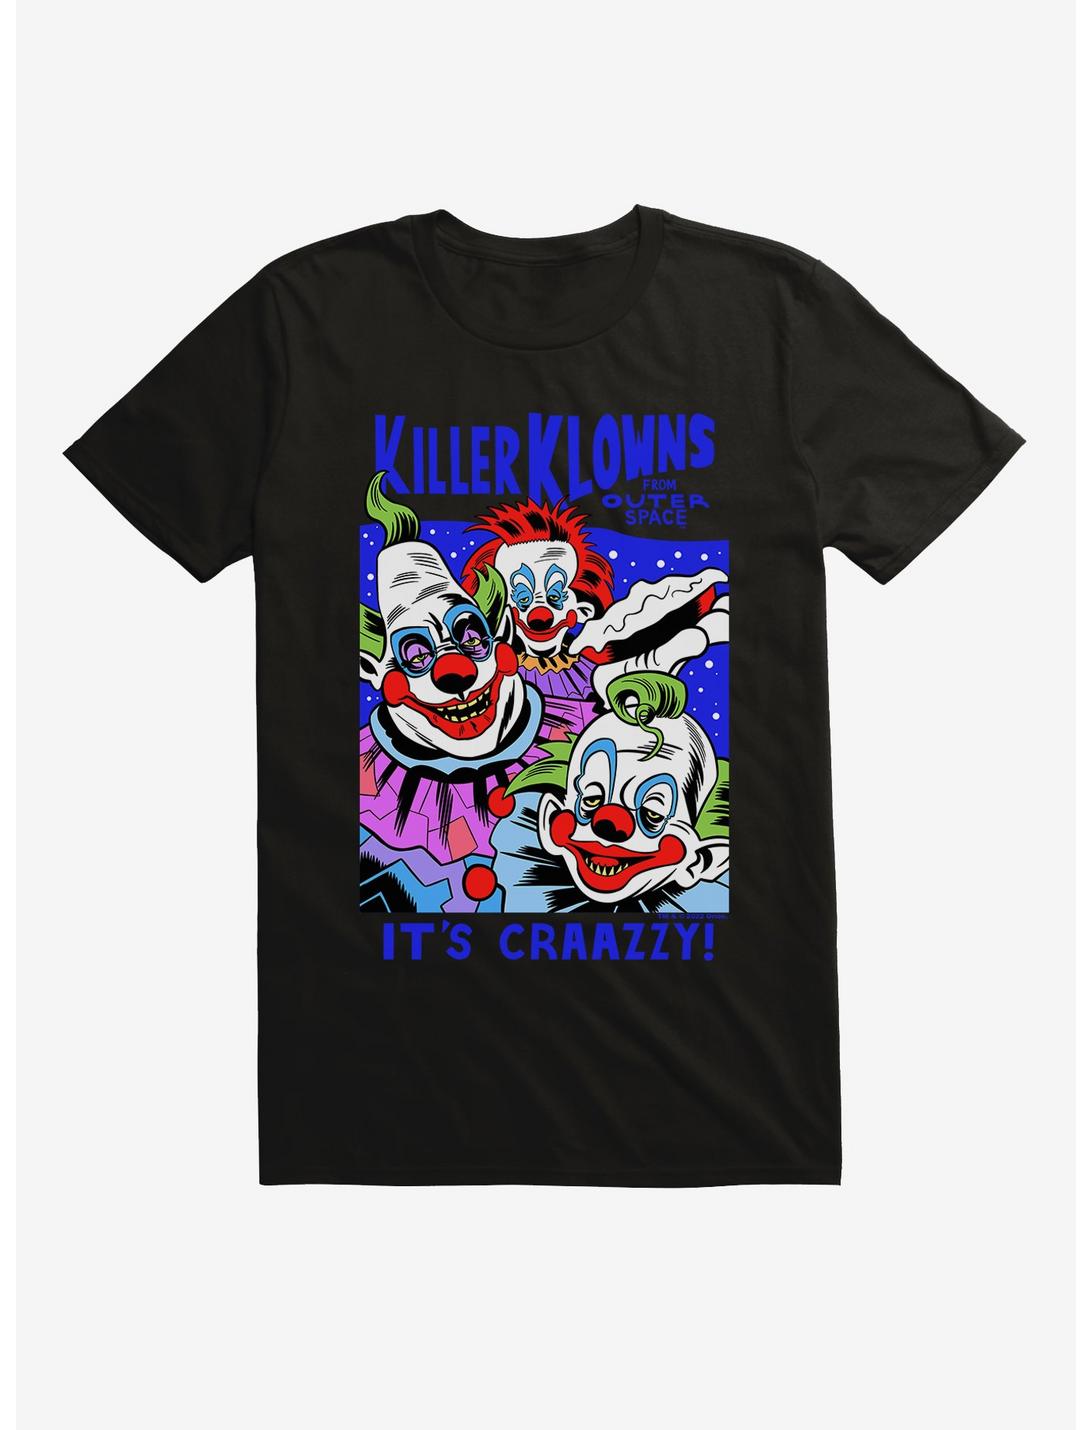 Killer Klowns From Outer Space It's Craazzy! T-Shirt, BLACK, hi-res